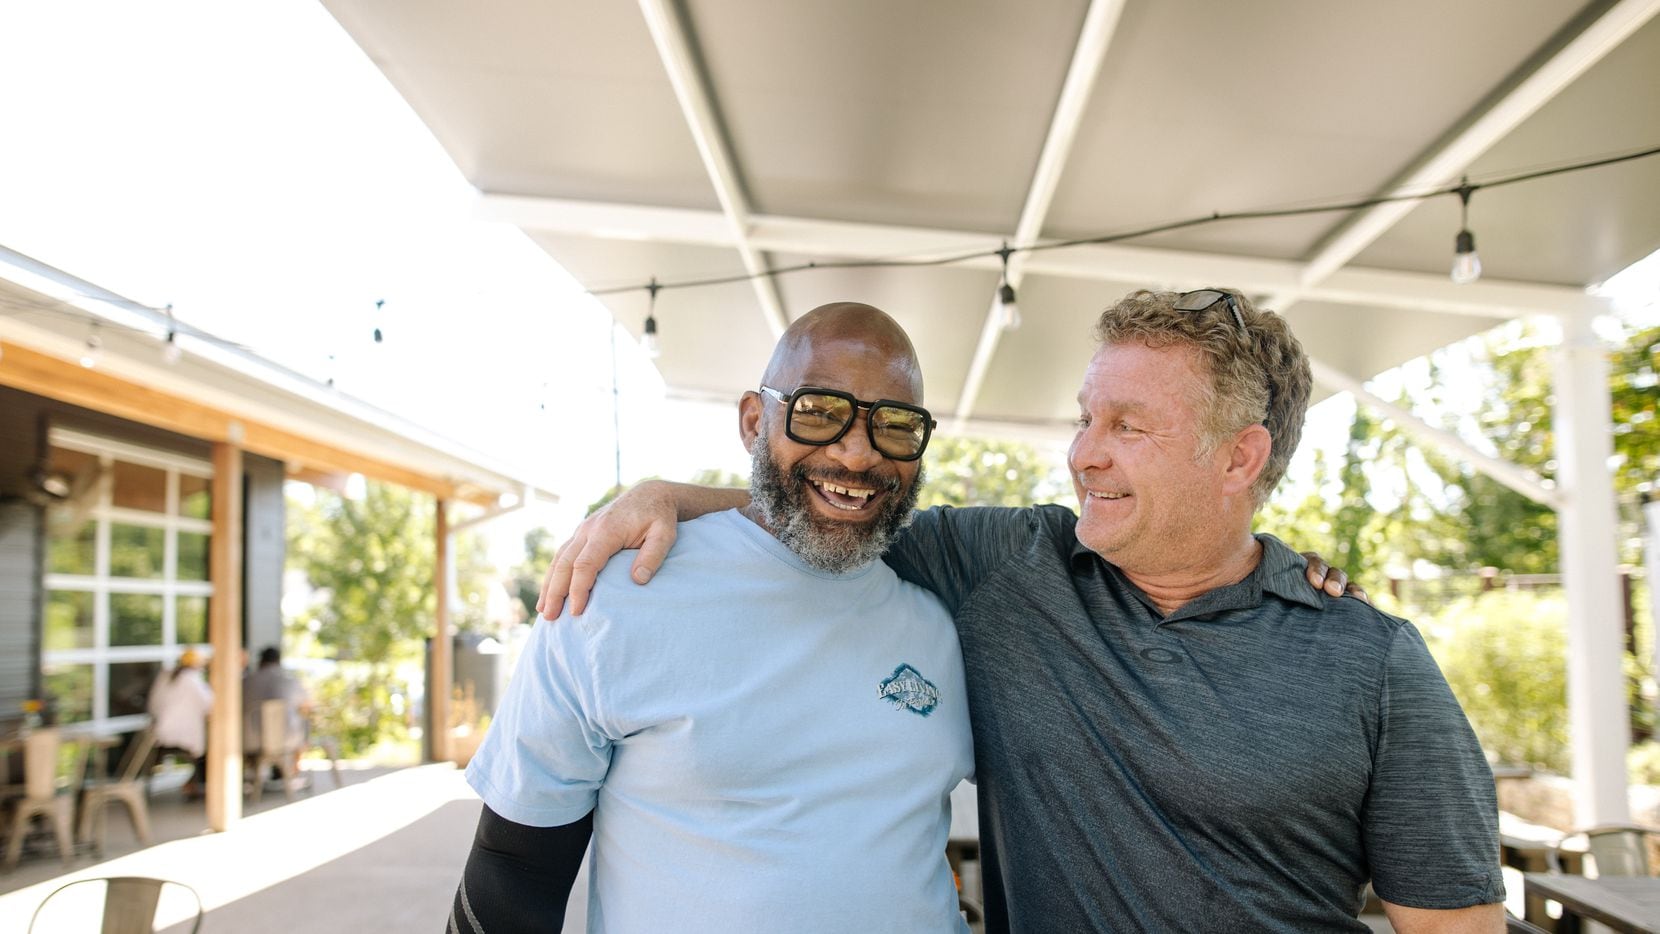 Daris Lee (left) with Bonton Farms founder Daron Babcock. Lee was one of 8,300 Texans hoping for a kidney transplant this Christmas. He got his last week.